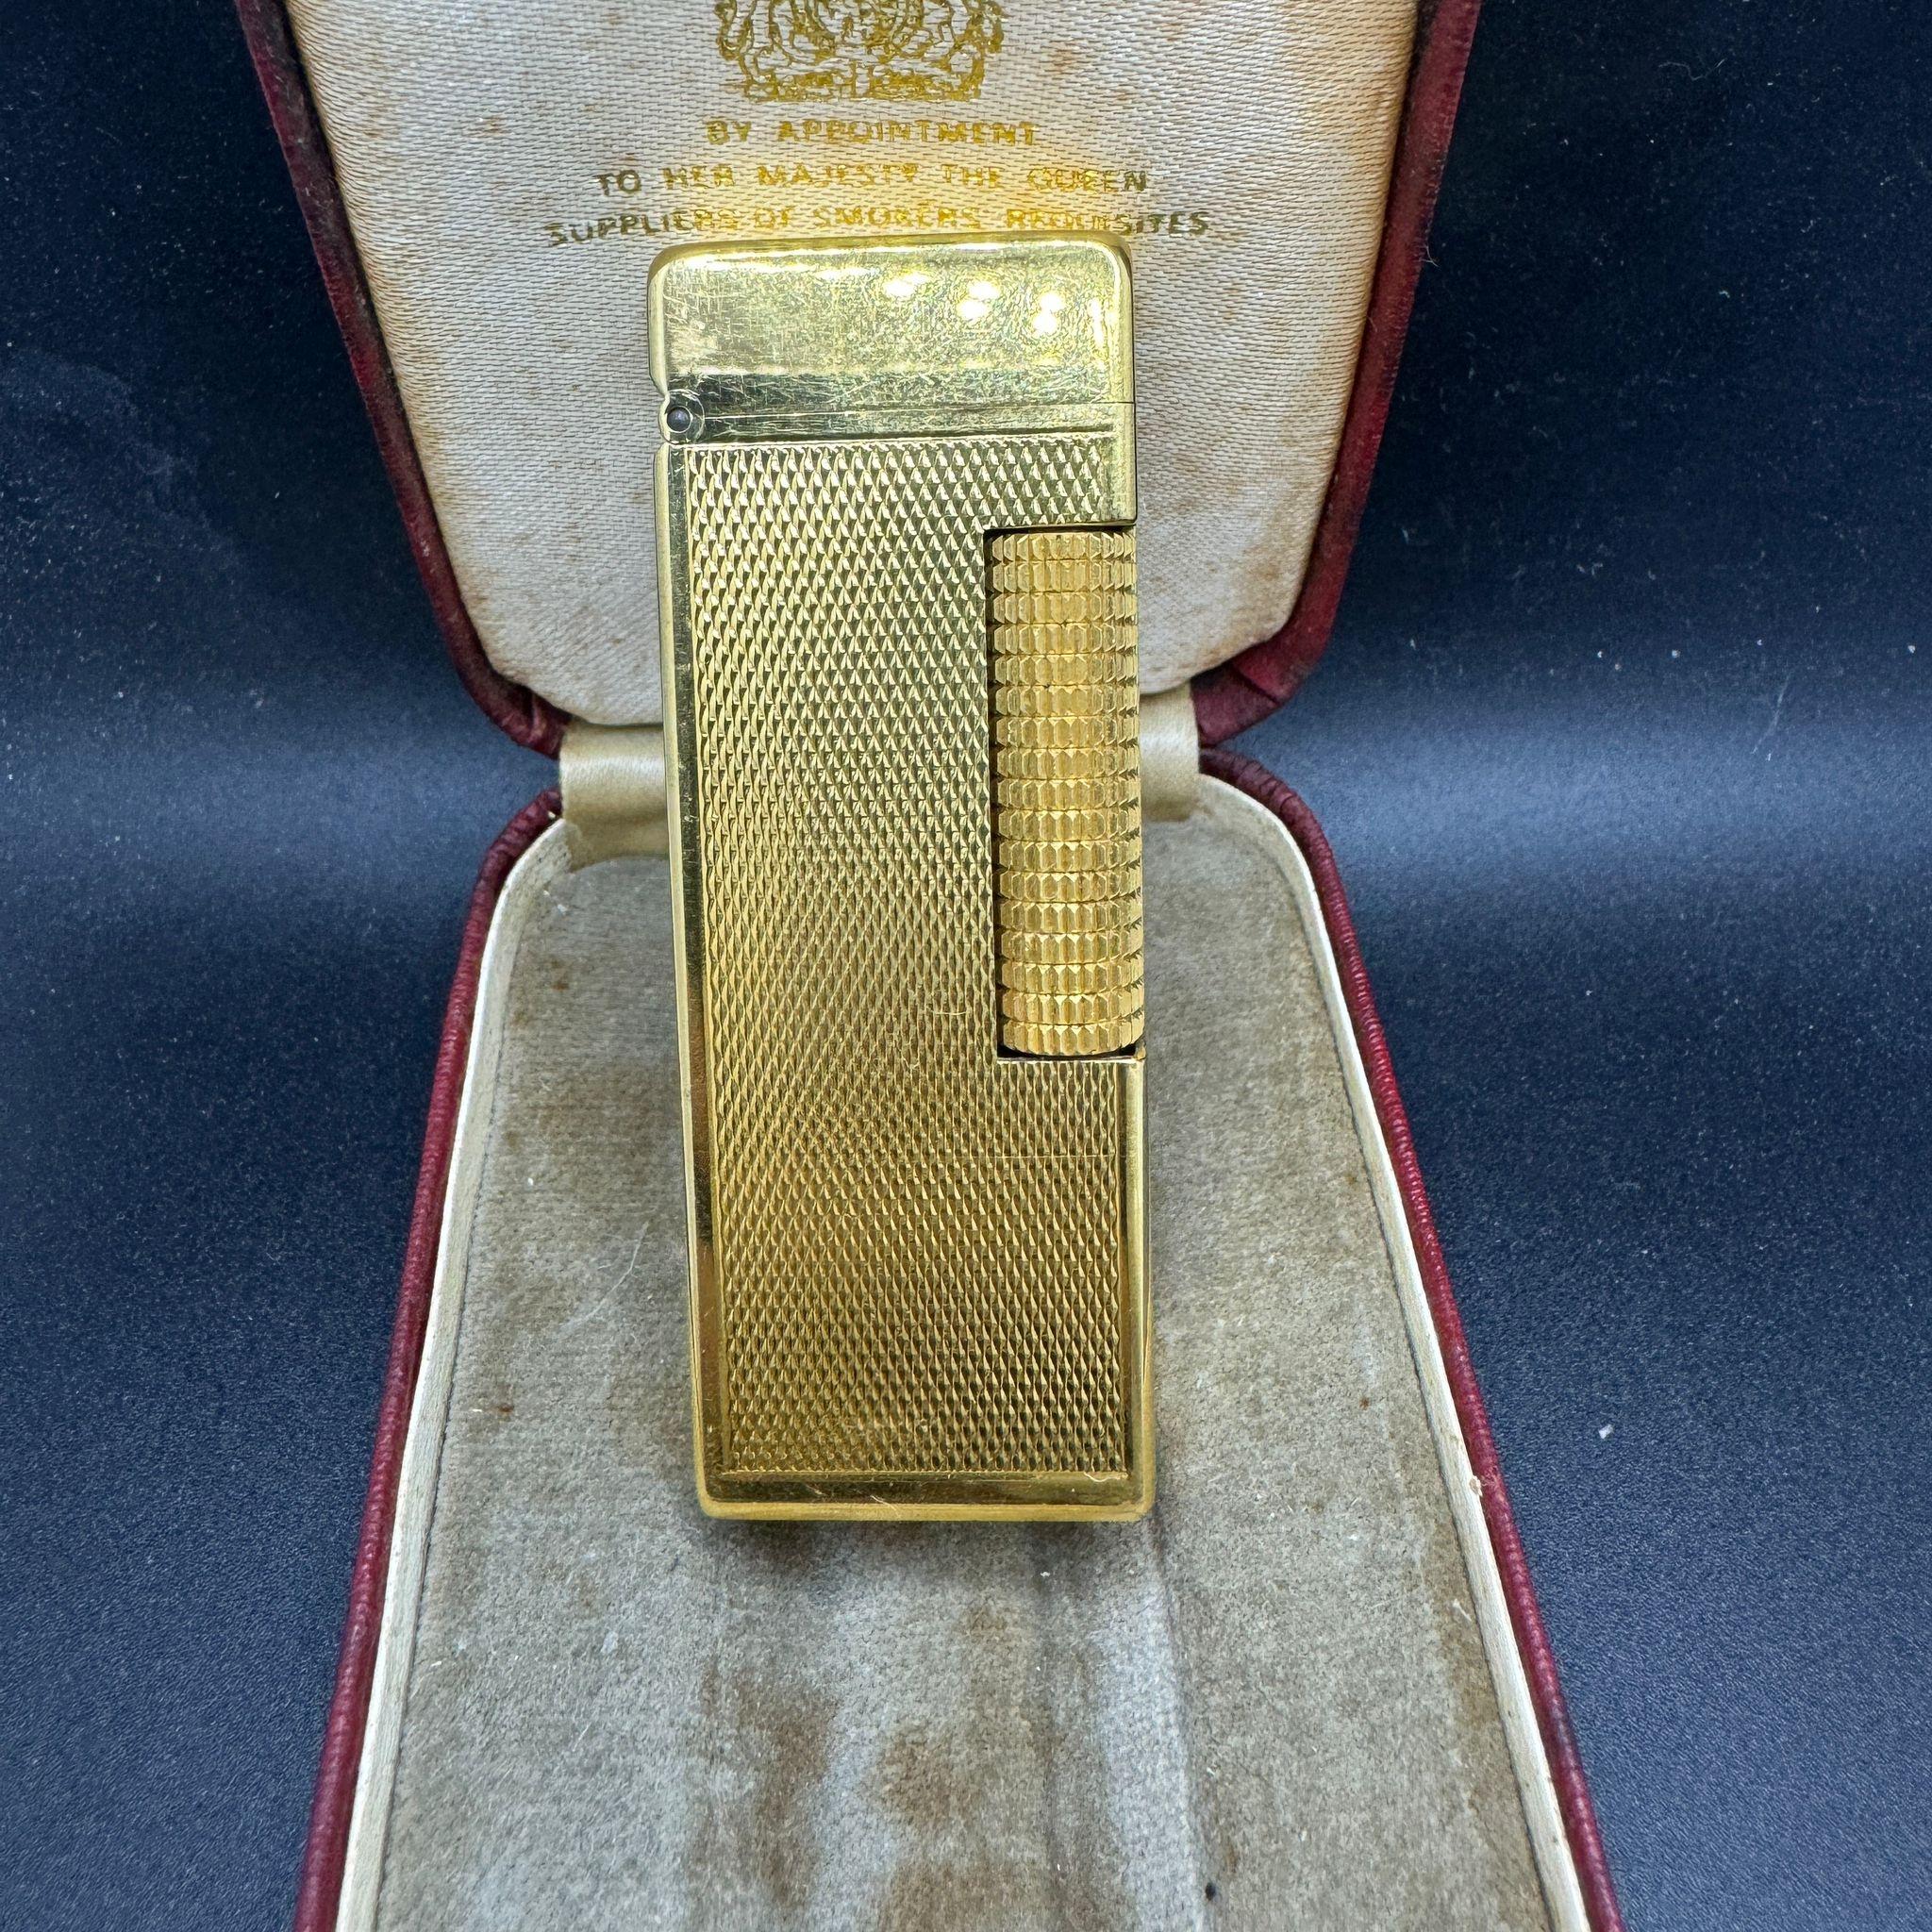 This Rare Original James Bond Vintage 1970s Dunhill ROLLALITE Gold Plated Lighter 
In Mint Working condition 
In the original British Red Sky Case with the Luxury red Velvet interior
The lighter is gold plated and in excellent condition 
There is an